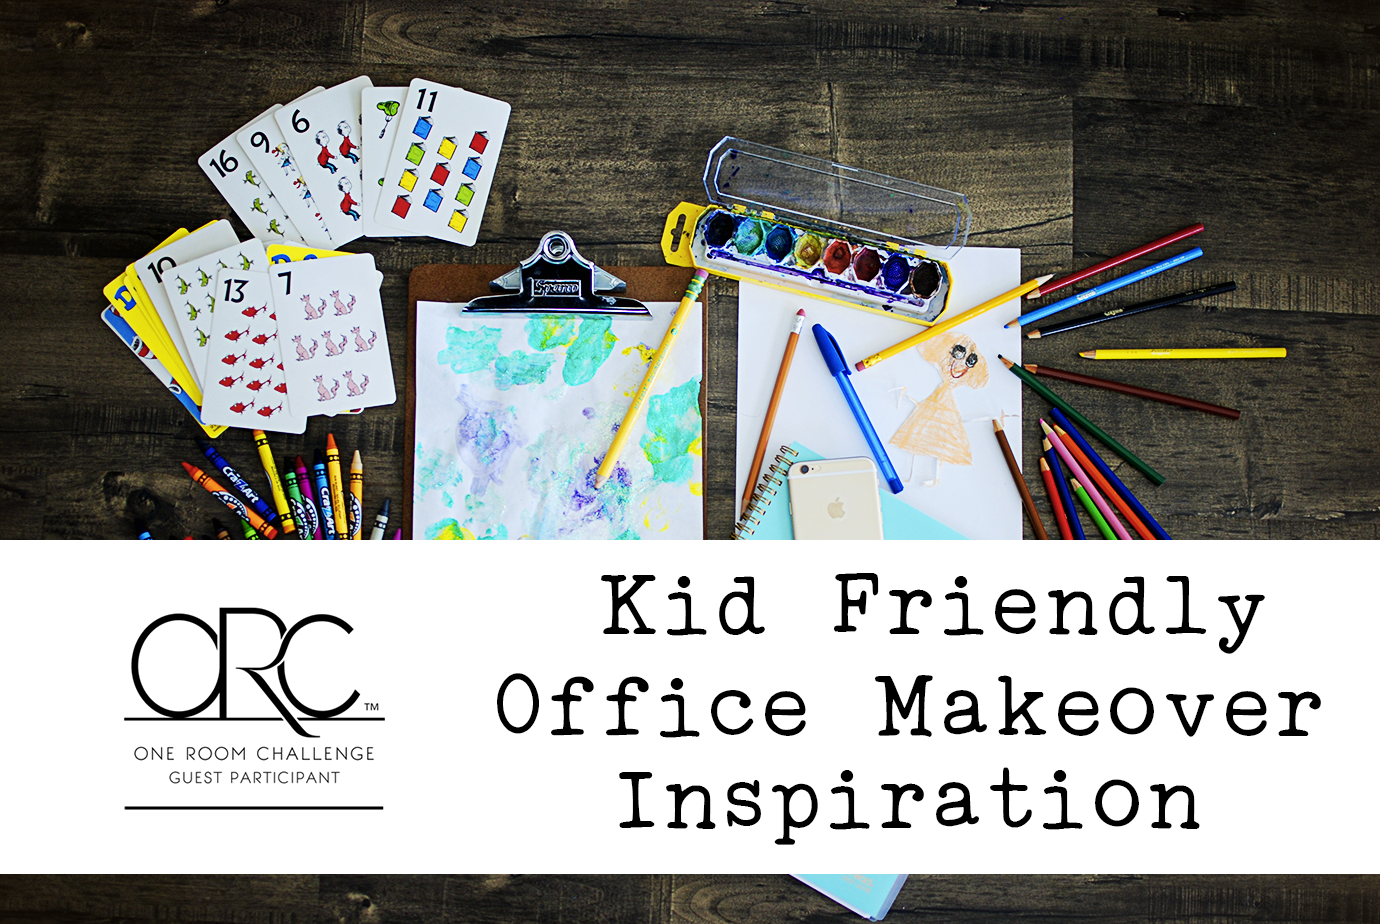 One Room Challenge Kid Friendly Office Makeover Inspiration - Crayons Planner Phone Watercolor Paints Flatlay